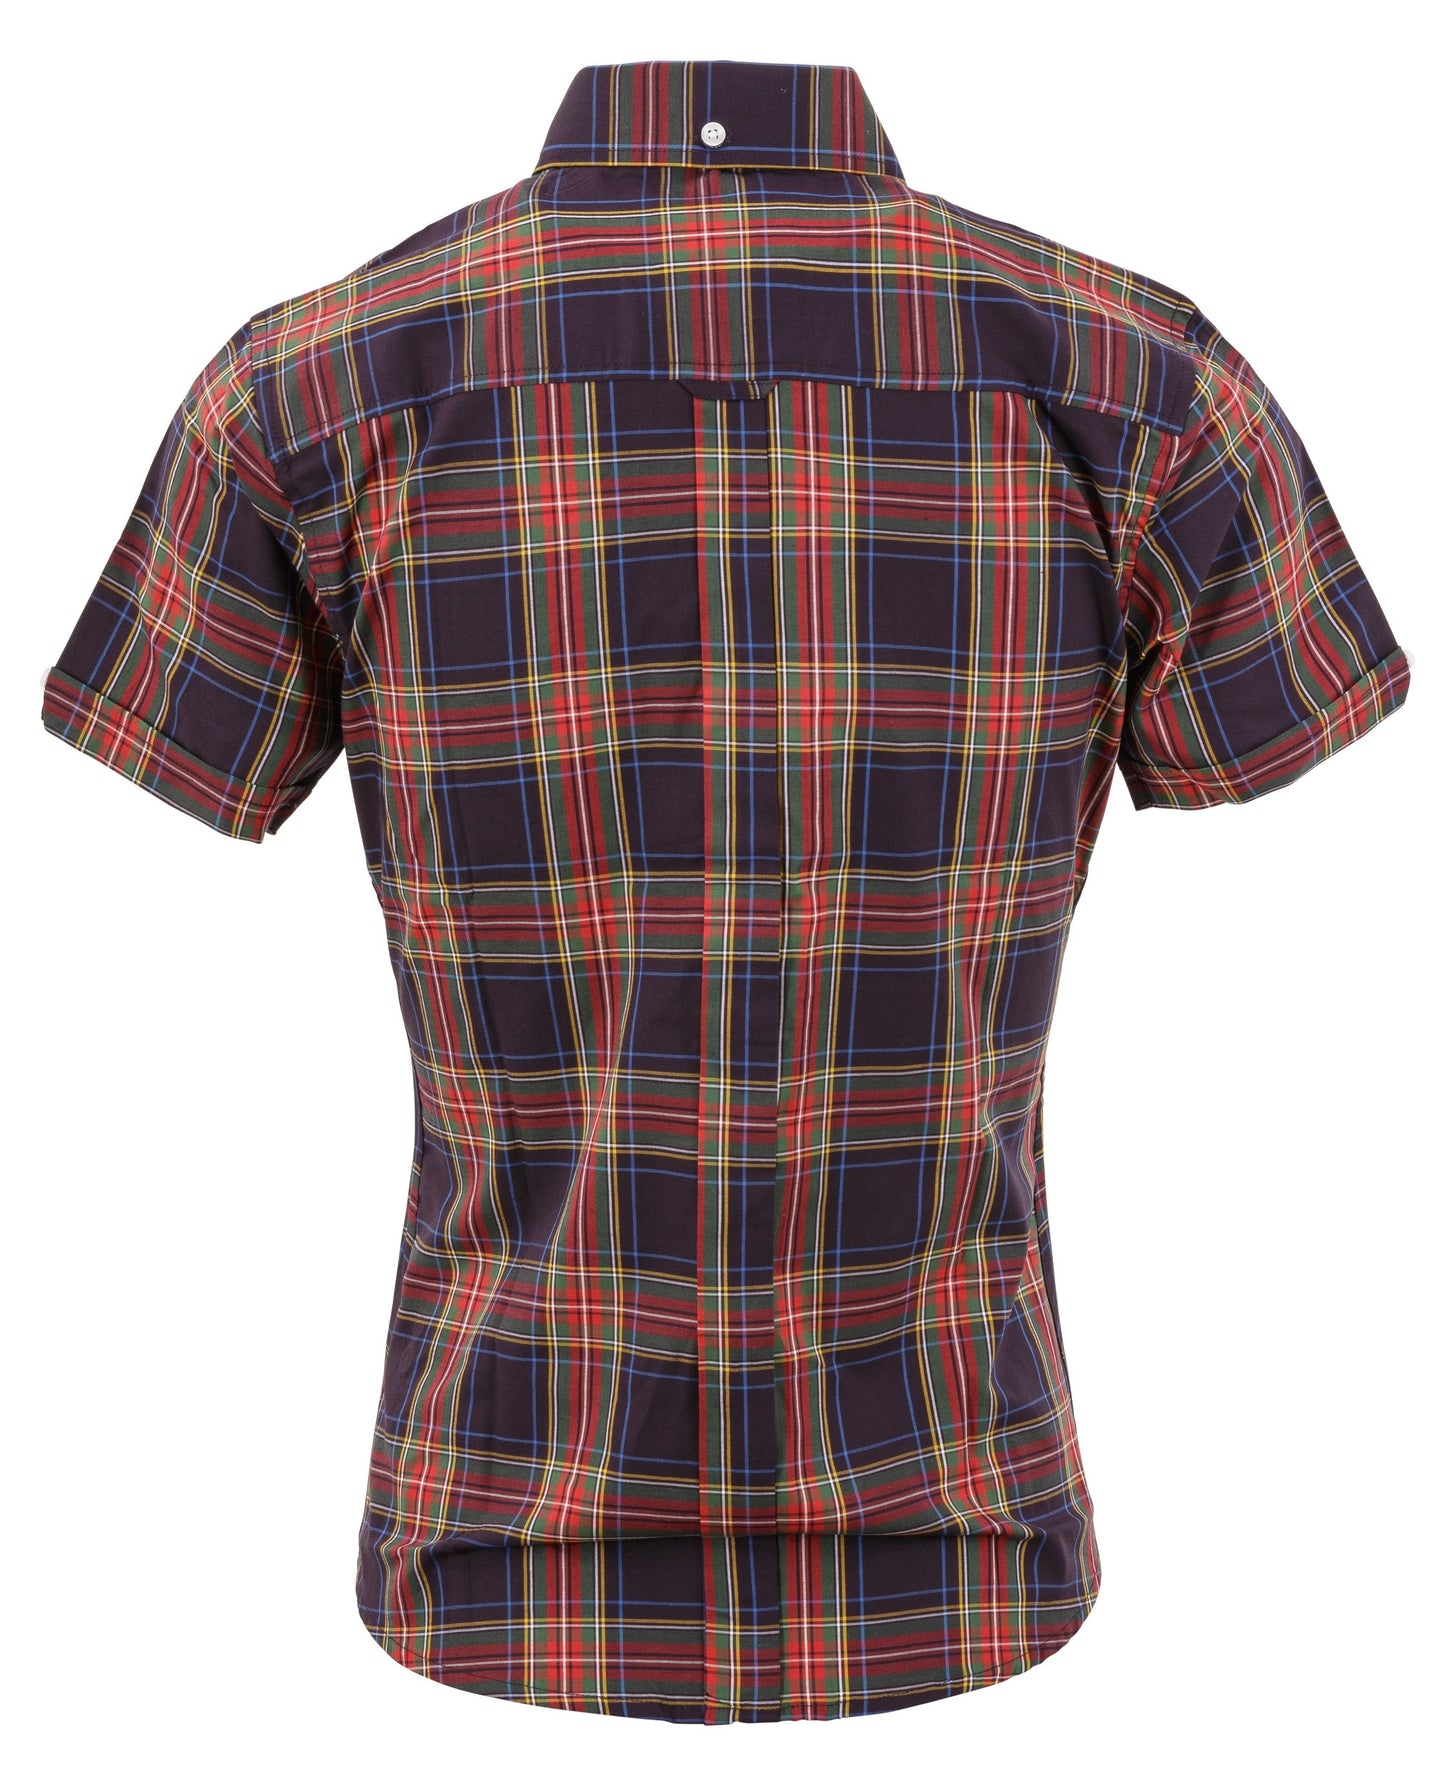 Relco Ladies Retro Navy Check Button Down Short Sleeved Shirts